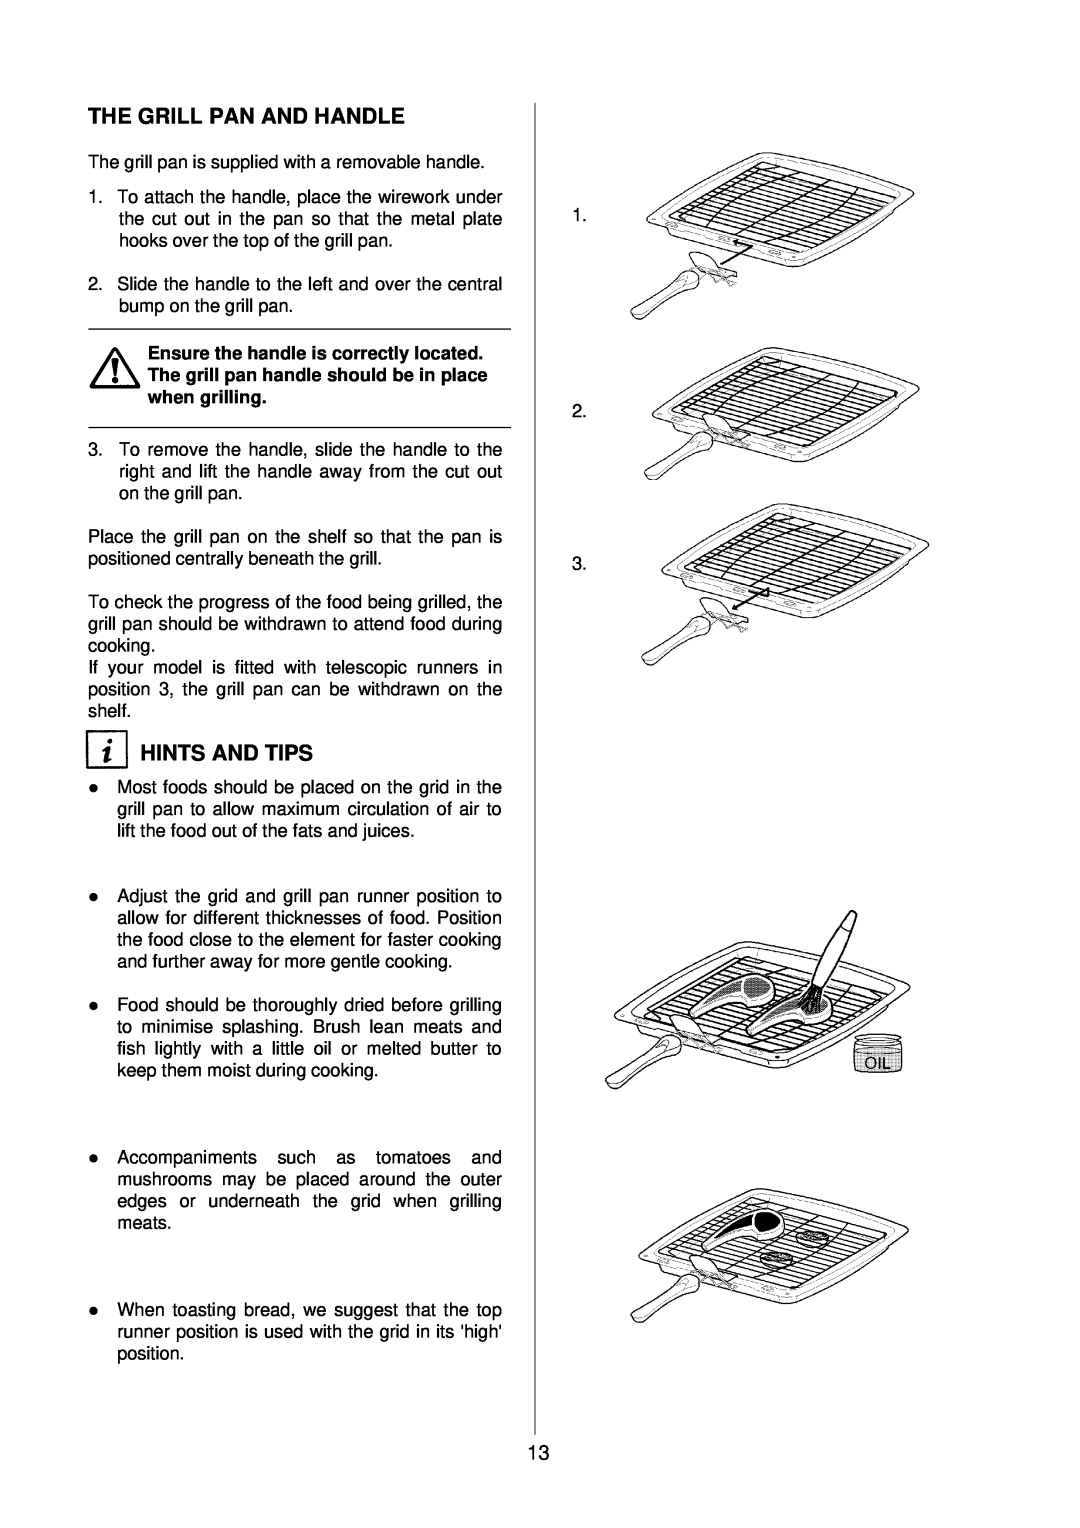 Electrolux D2160-1 operating instructions The Grill Pan And Handle, Hints And Tips 